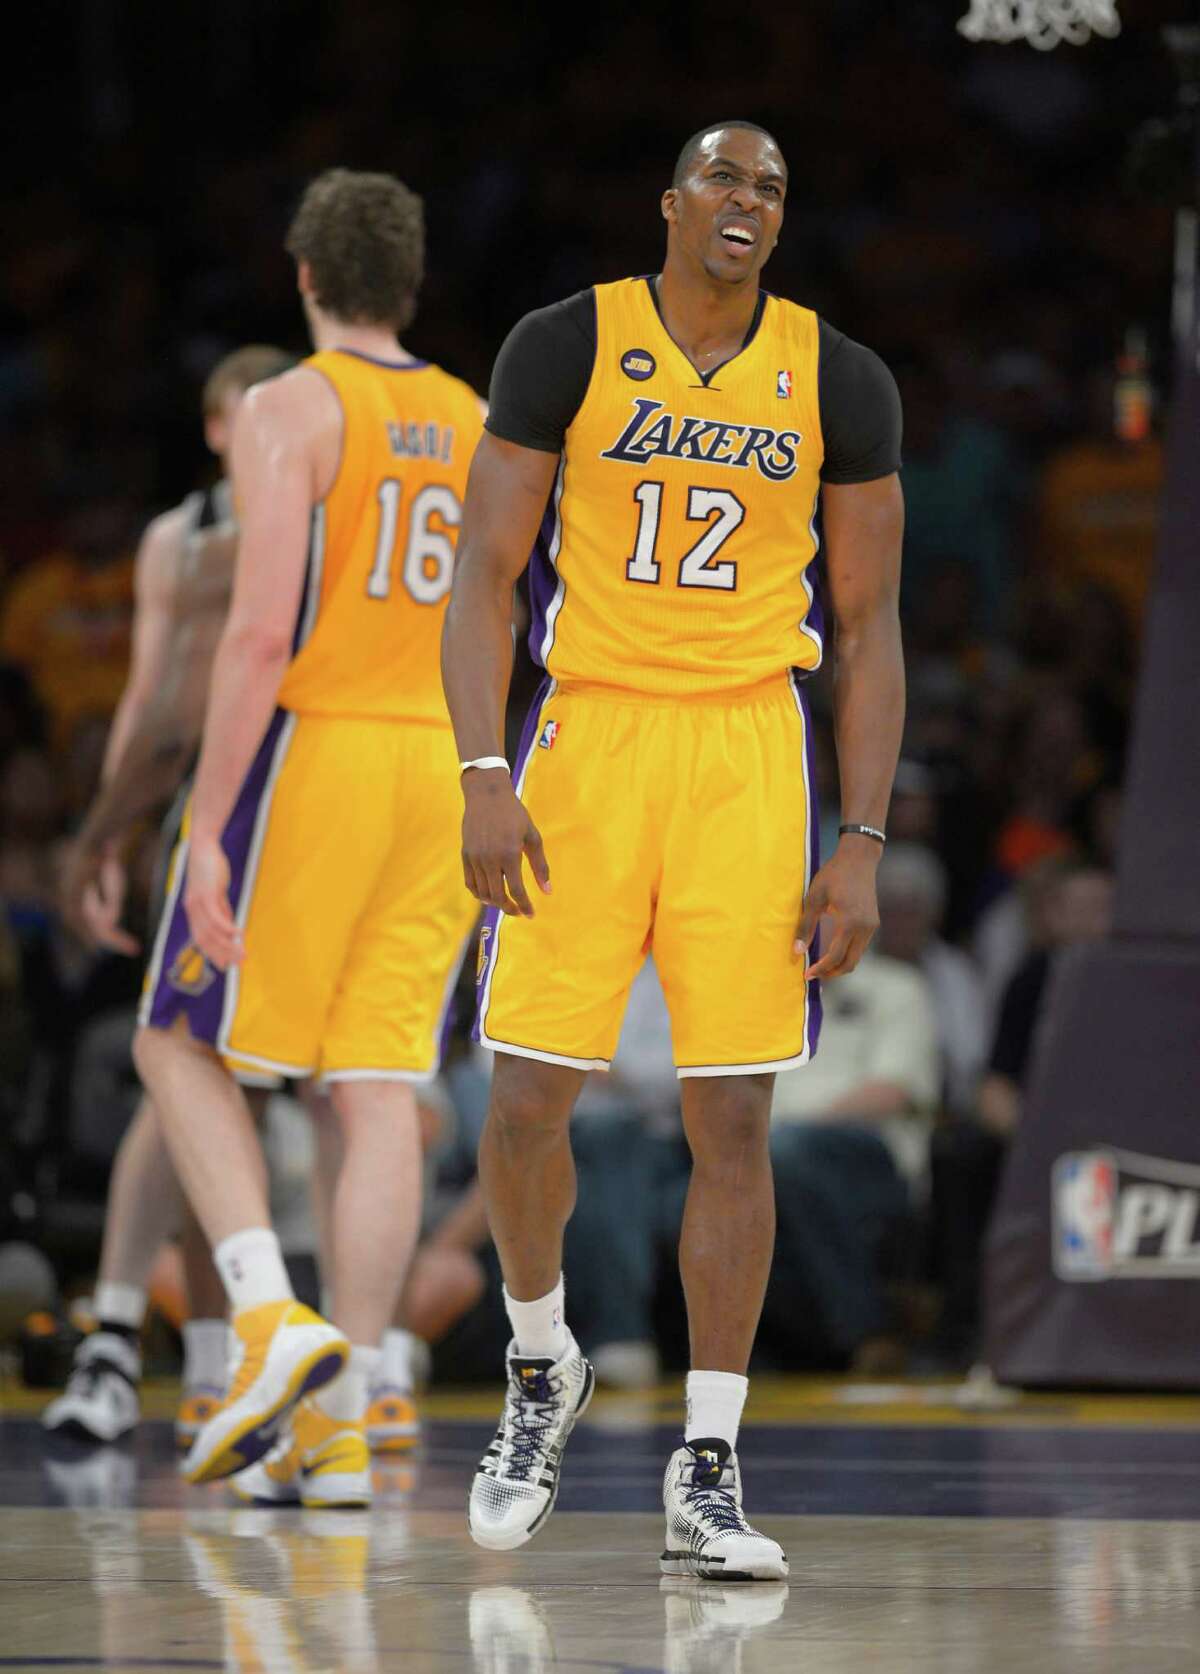 Los Angeles Lakers center Dwight Howard, right, appears fatigued as forward Pau Gasol, of Spain, stand in the background during the first half in Game 3 of a first-round NBA basketball playoff series, Friday, April 26, 2013, in Los Angeles. (AP Photo/Mark J. Terrill)